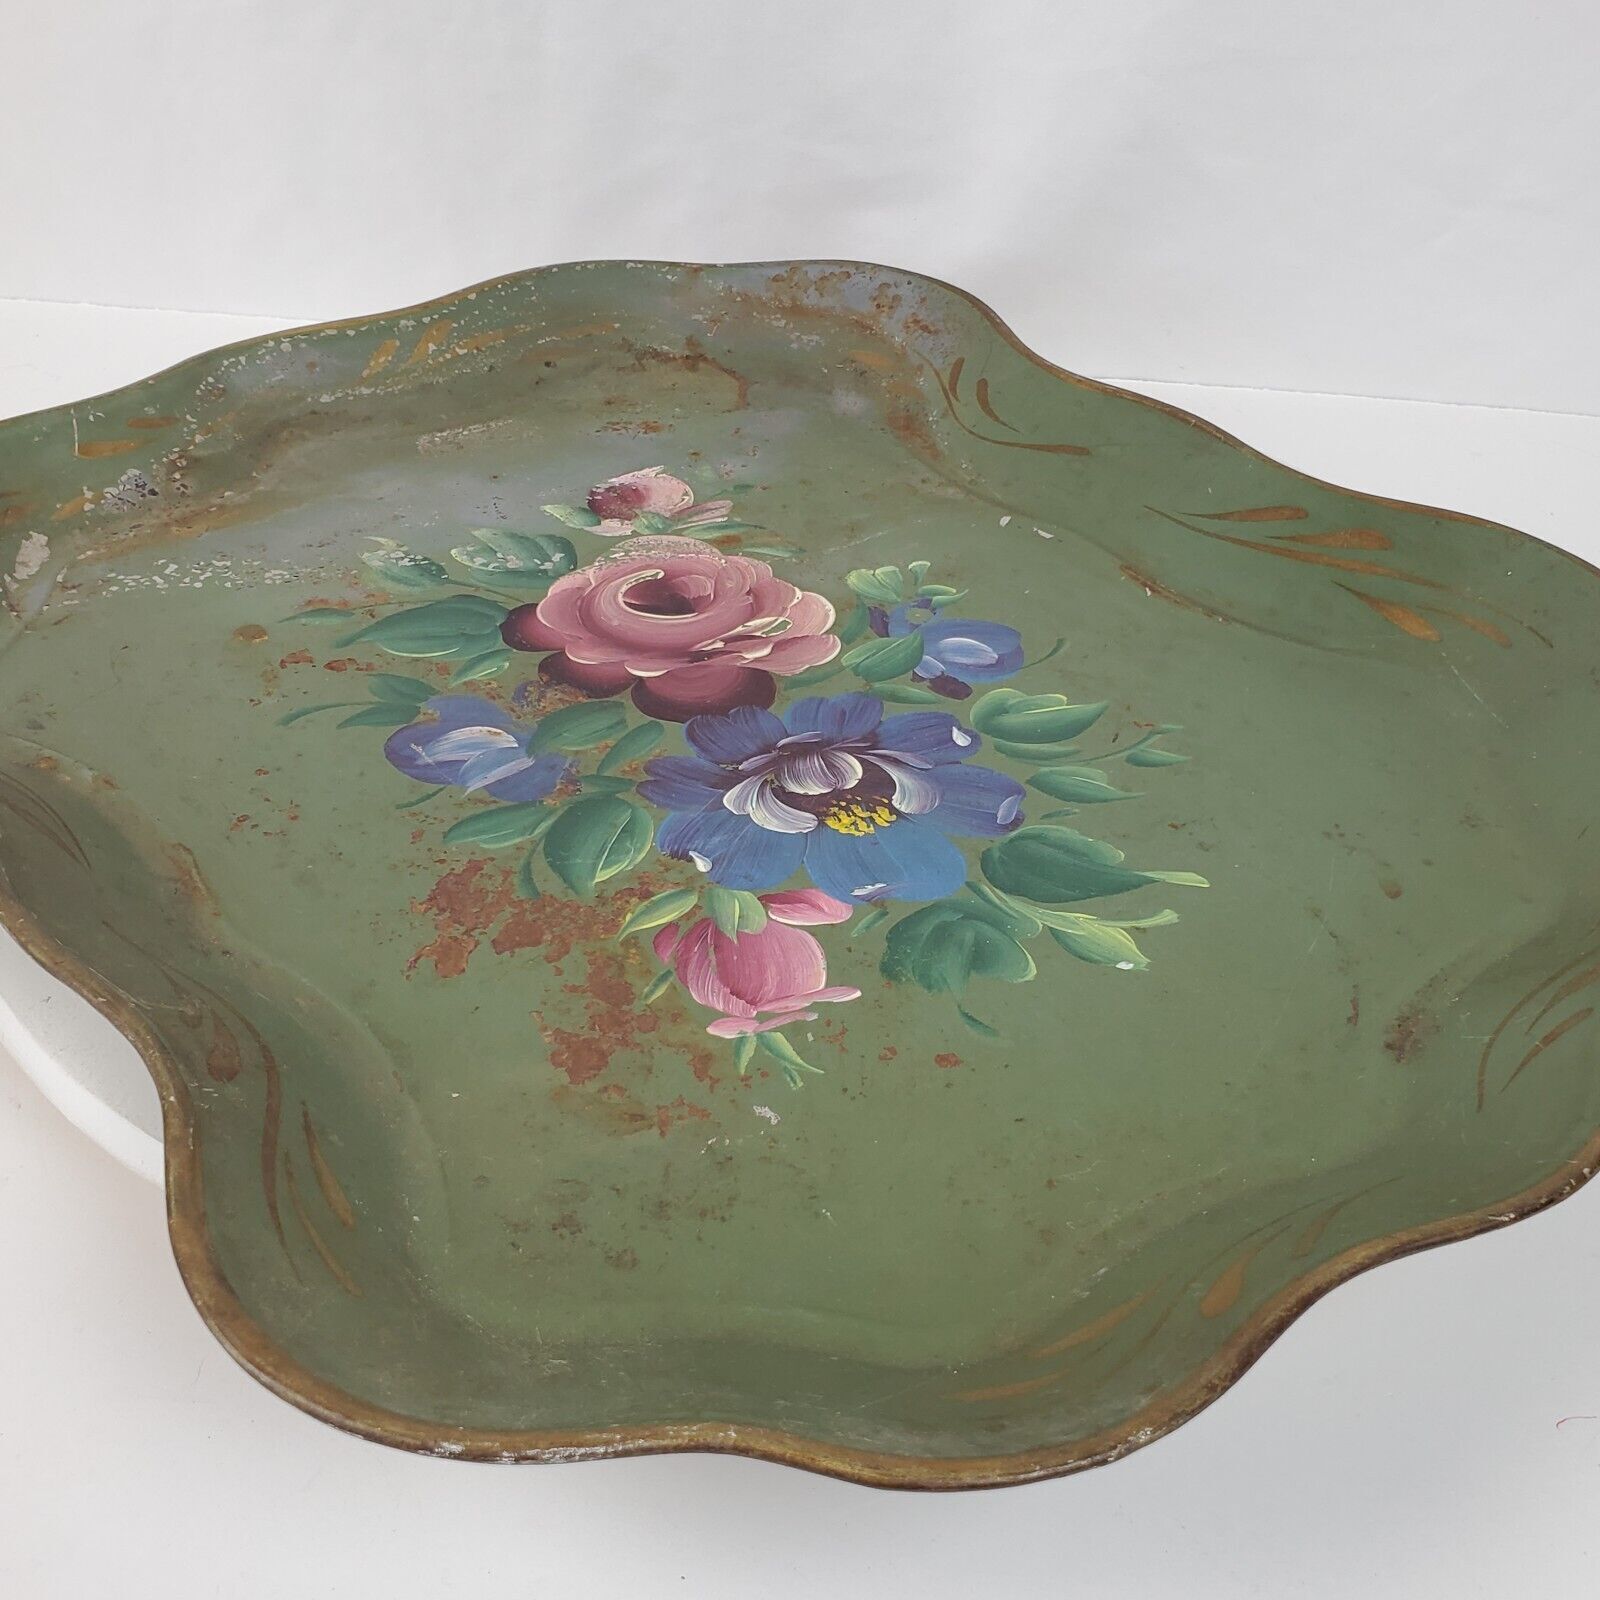 Vintage Nashco Metal Serving Tray Hand Painted Floral 17x14 Inch Mid Century